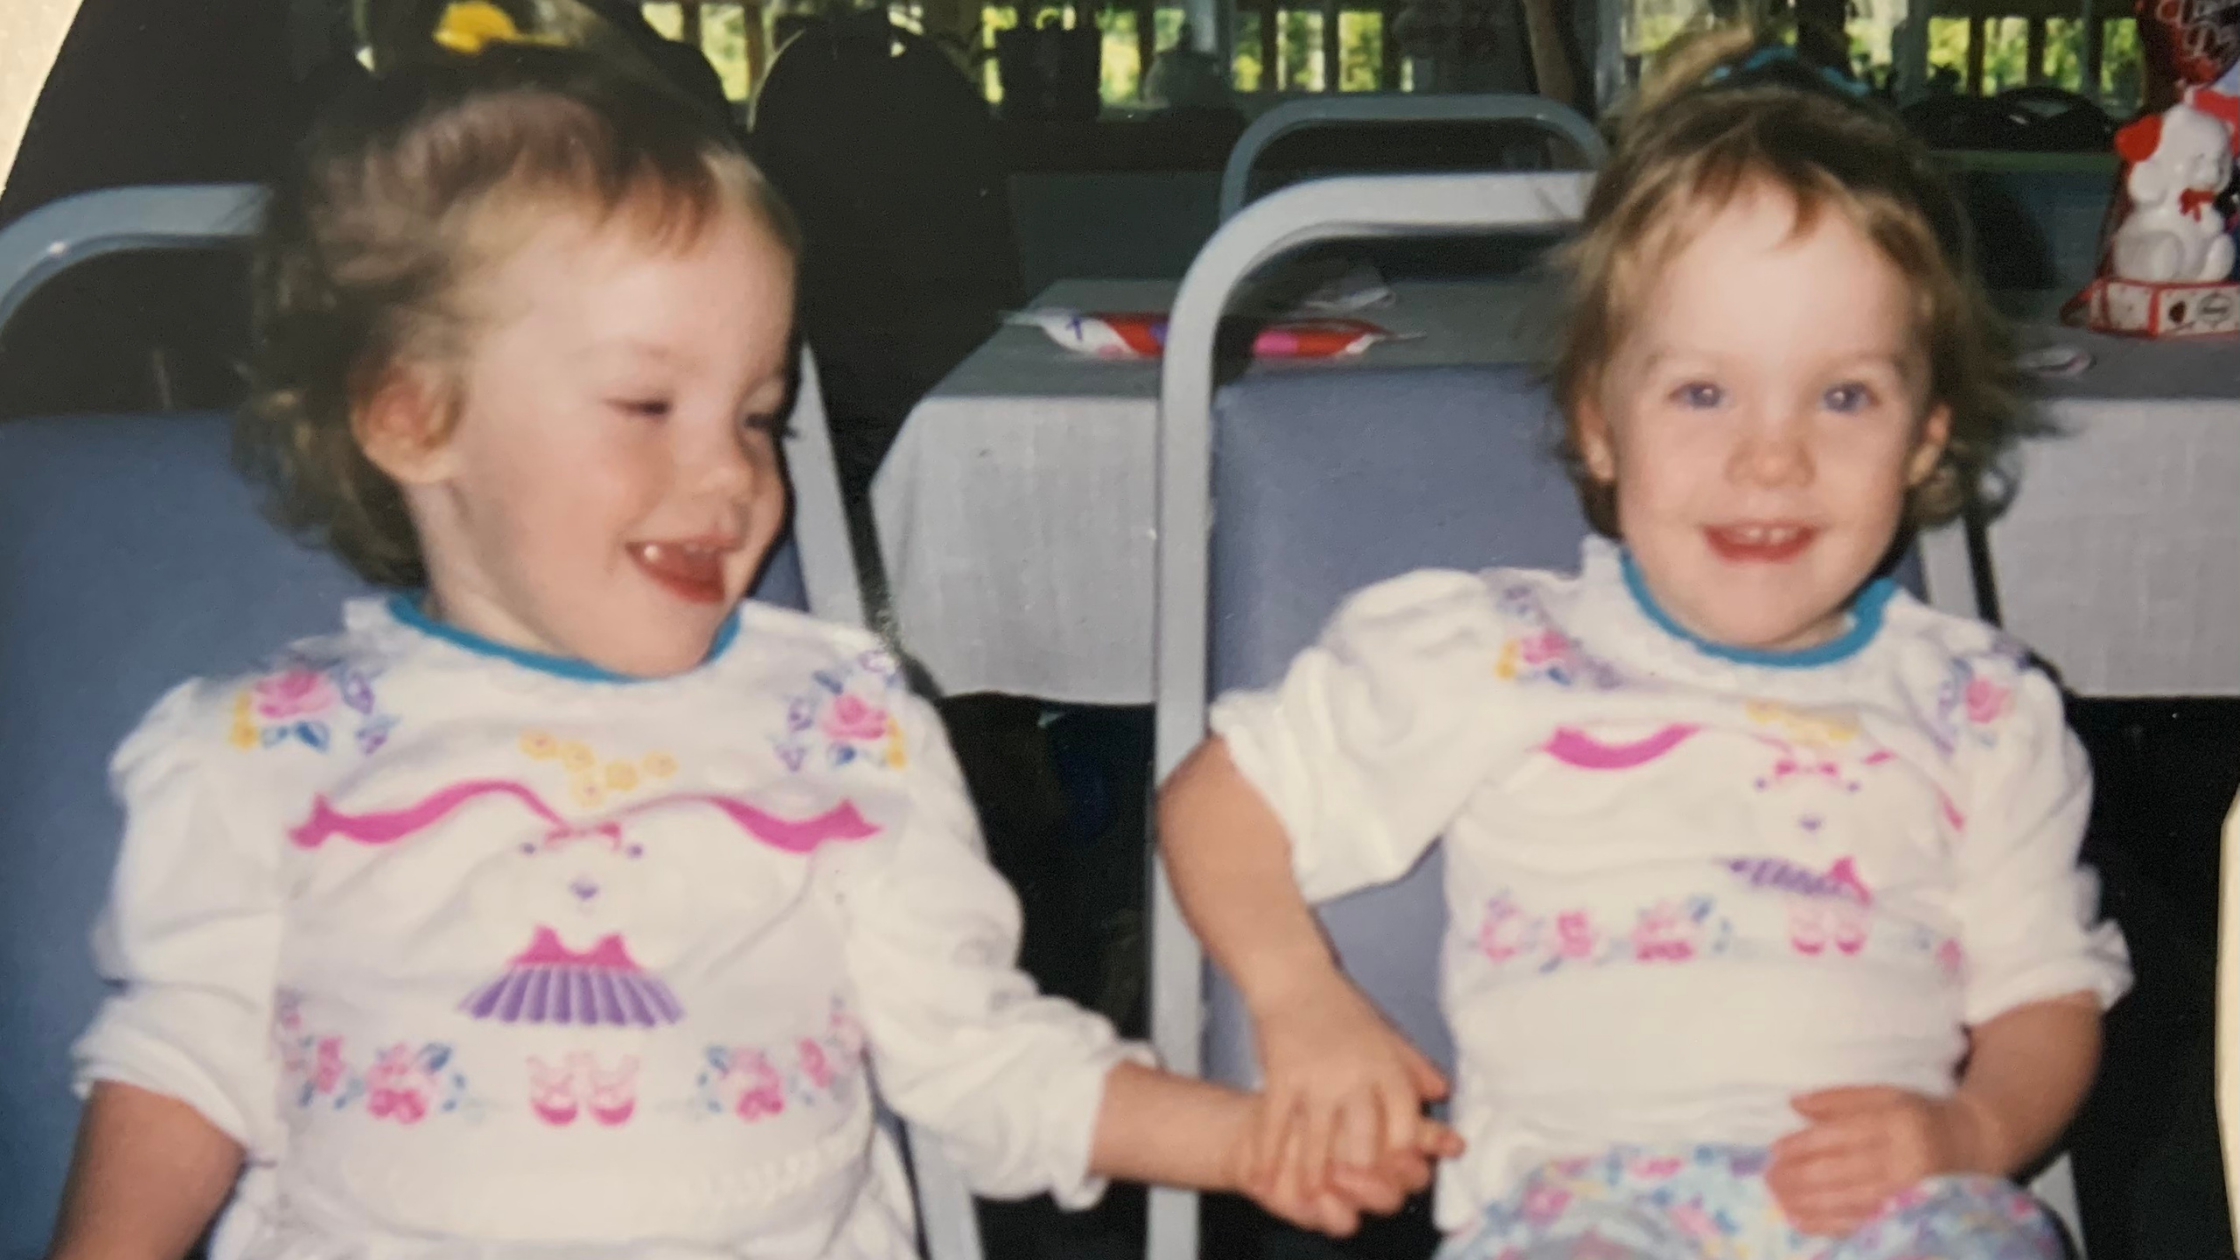 10 “annoying” questions answered by twins